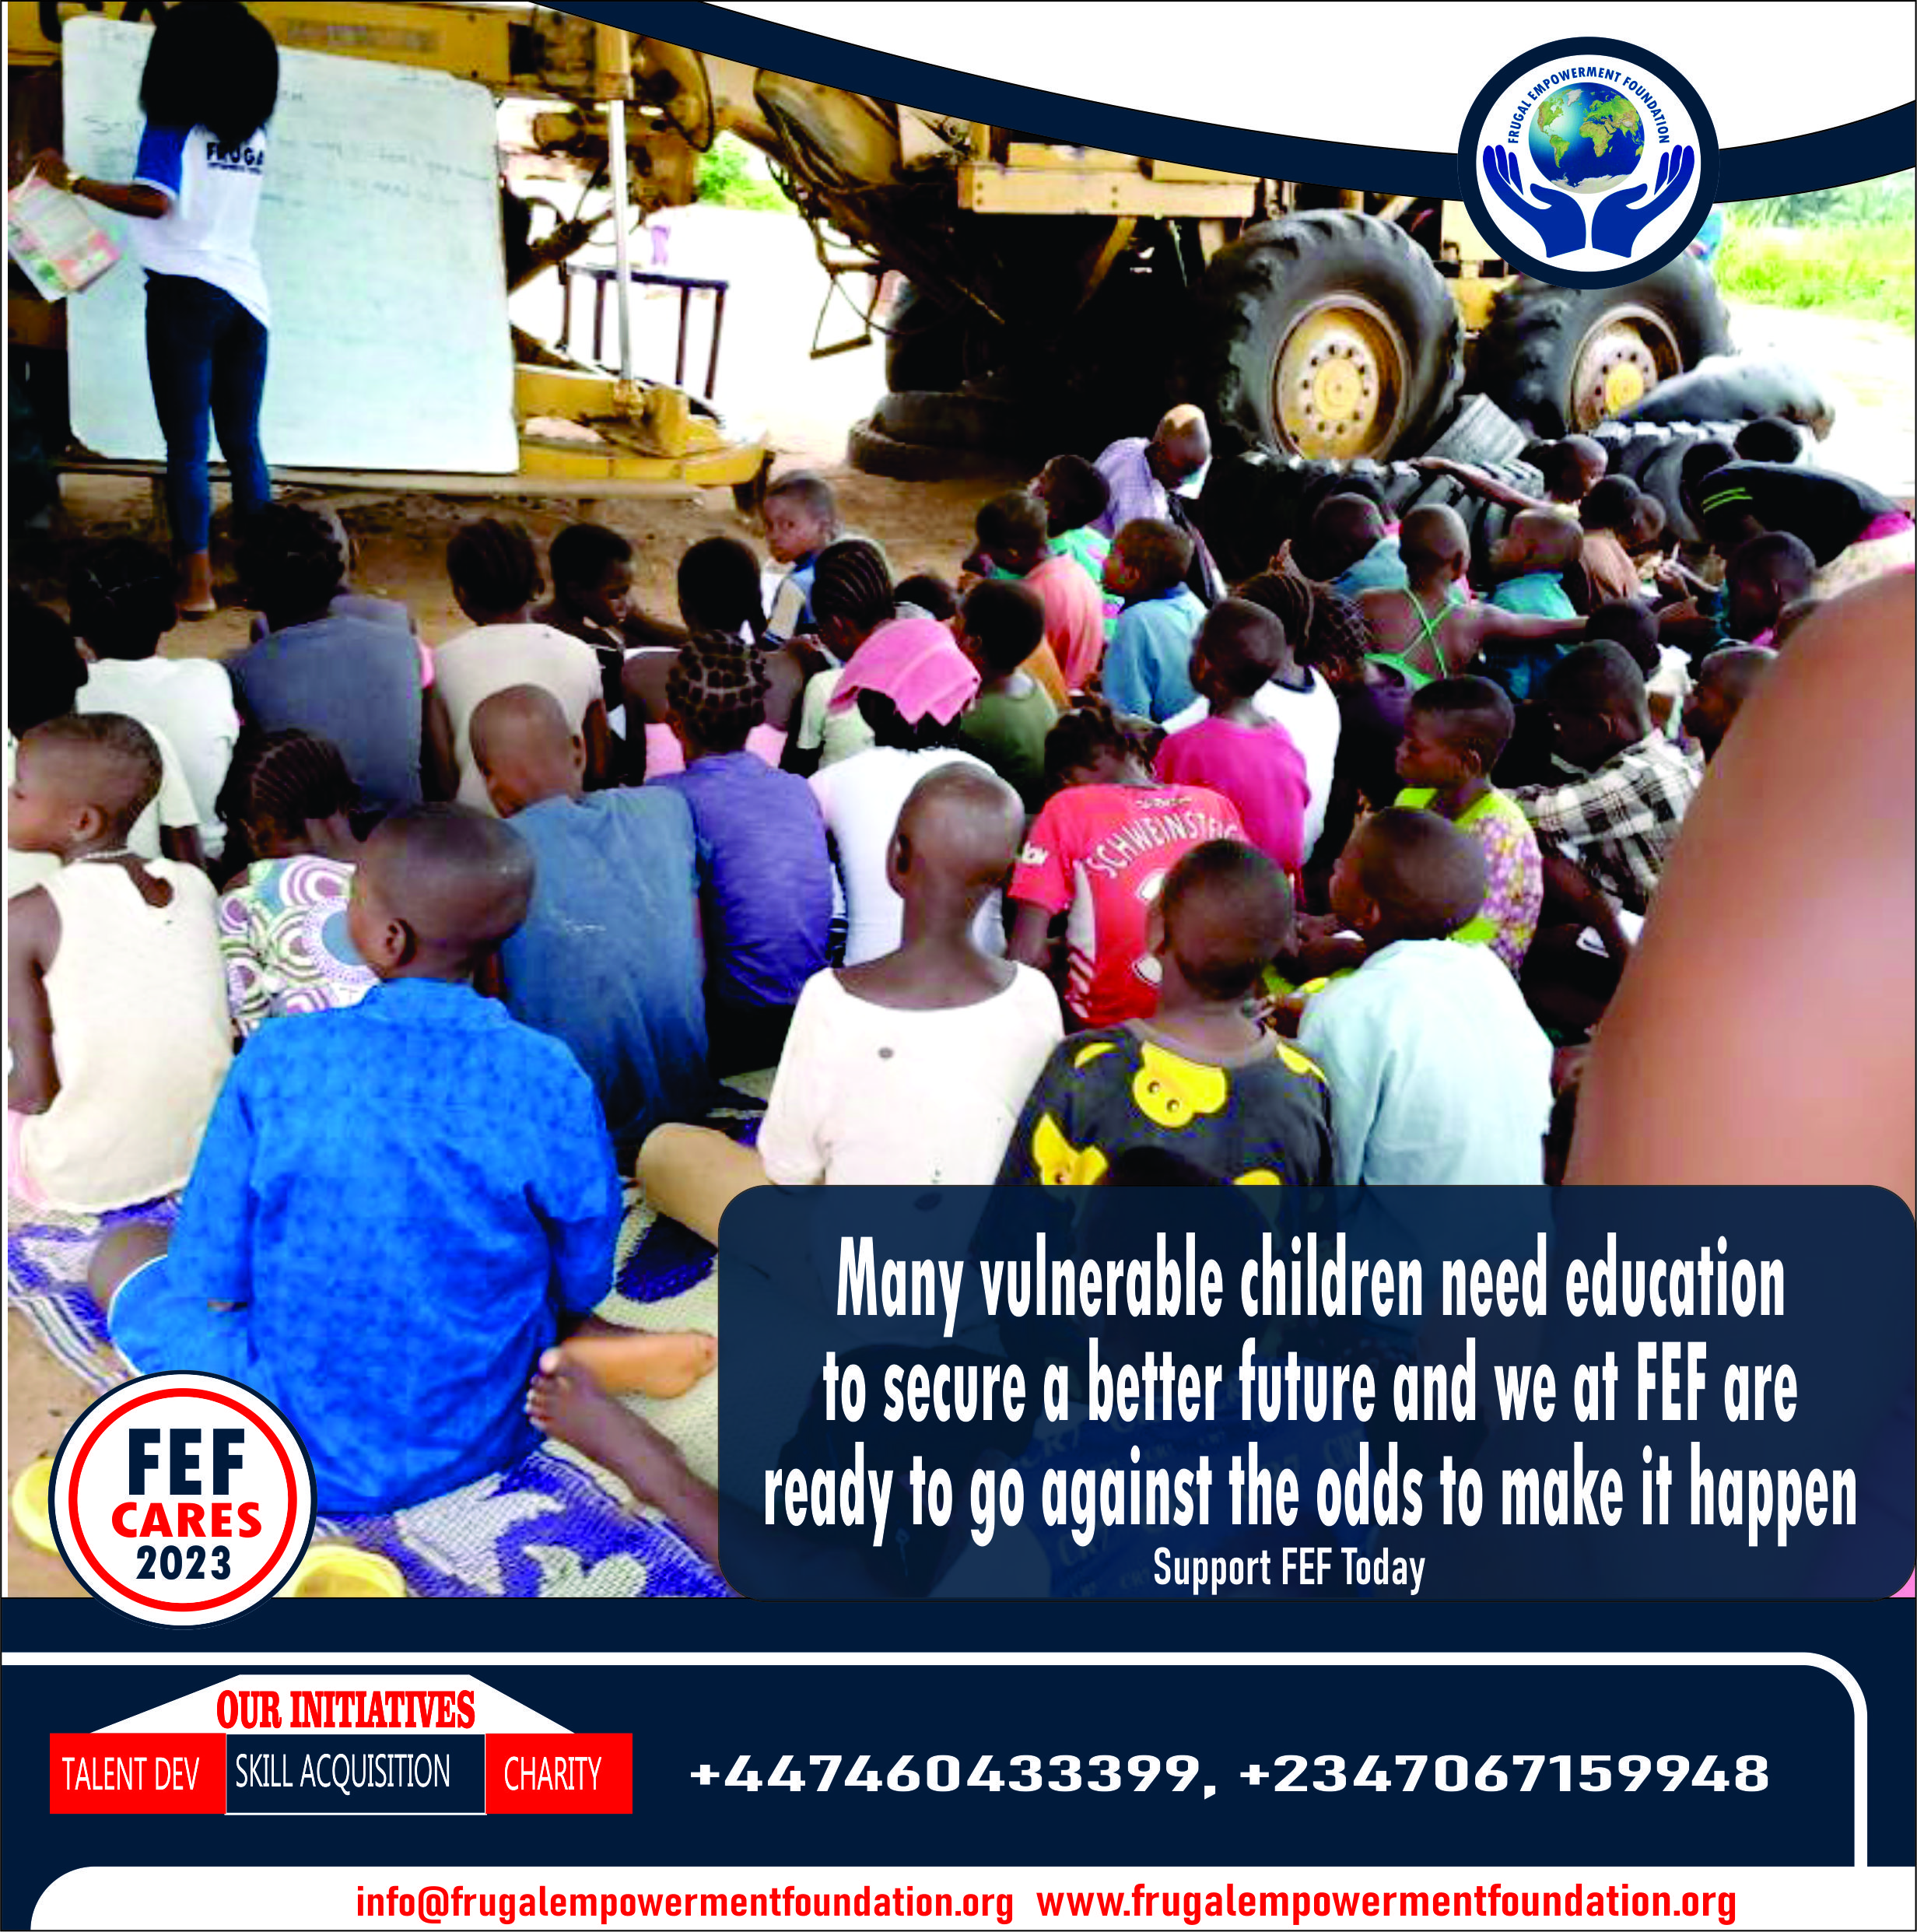 Many vulnerable children need education to secure a better future and we at FEF are ready to go against the odds to make it happen